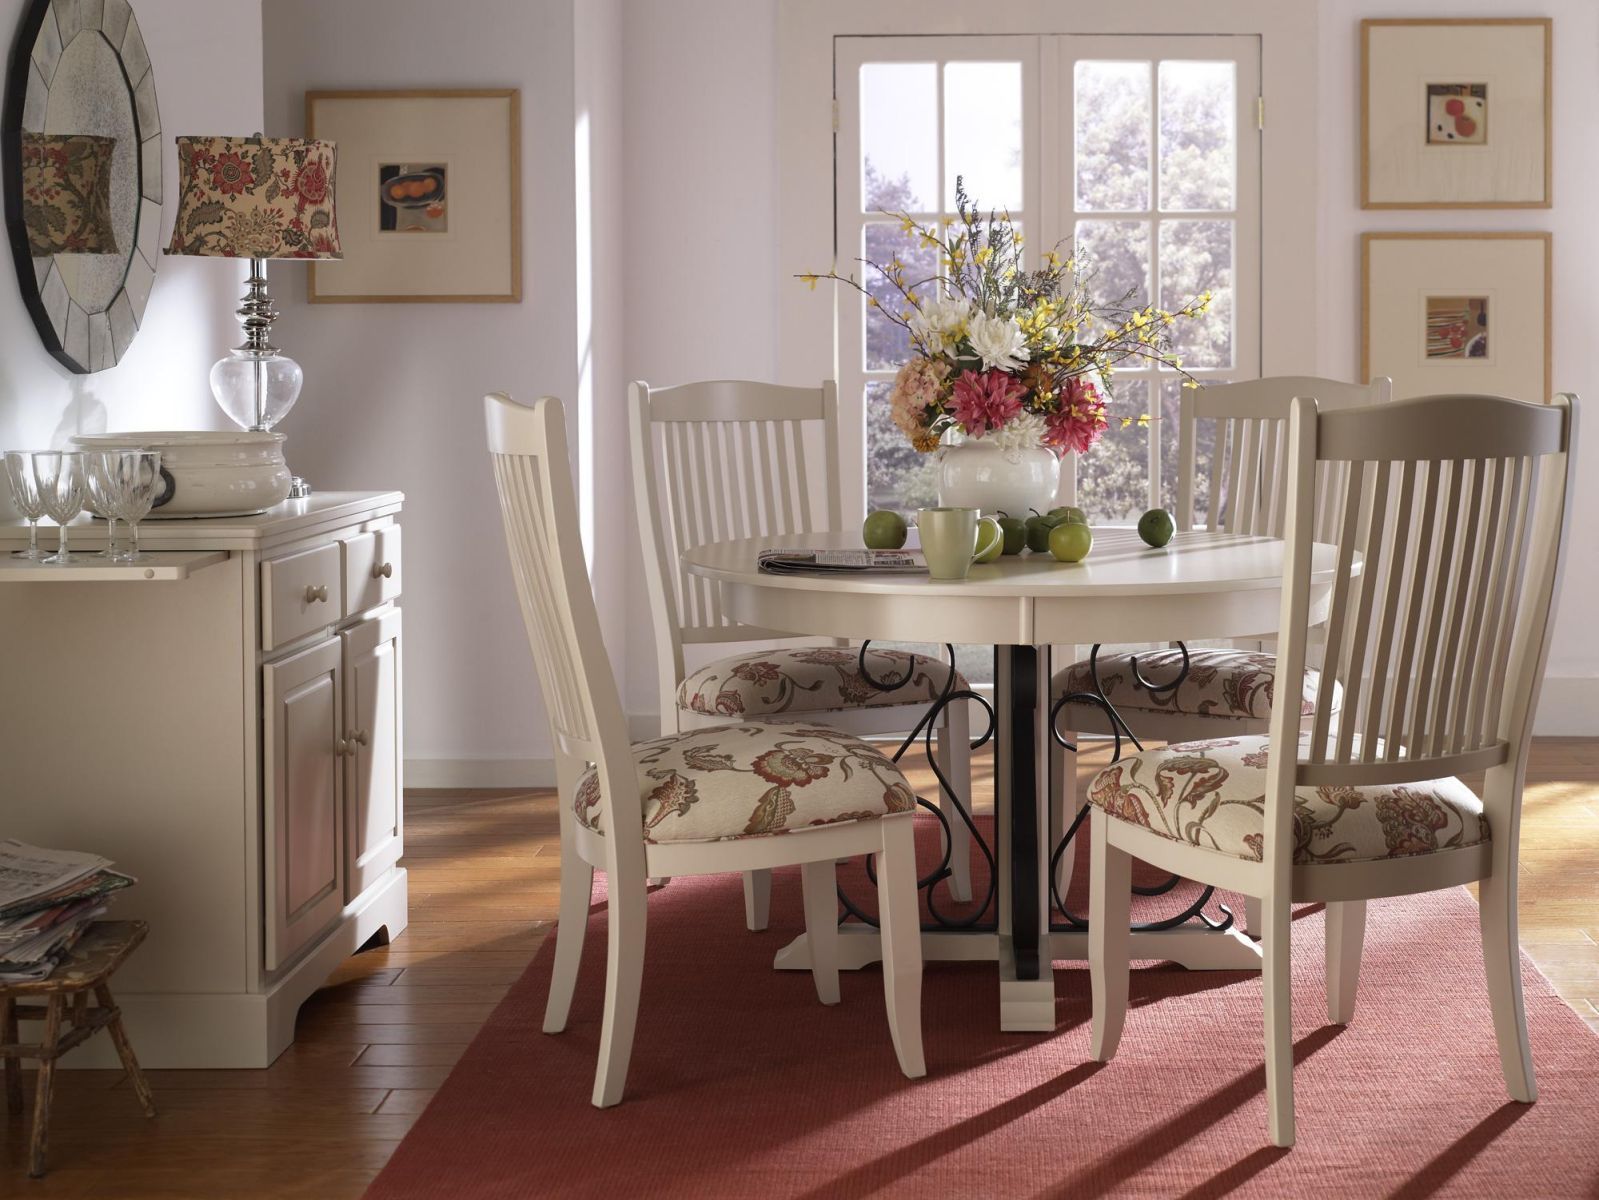 Canadel Dining Room SetCall (631) 742-1351 for Best Price Guarantee Long Island FurnitureDinette Sets New York , Dinette Sets Long Island , Dining Room Sets New York , Dining Room Sets Long Island, Dining Room Chairs Long Island